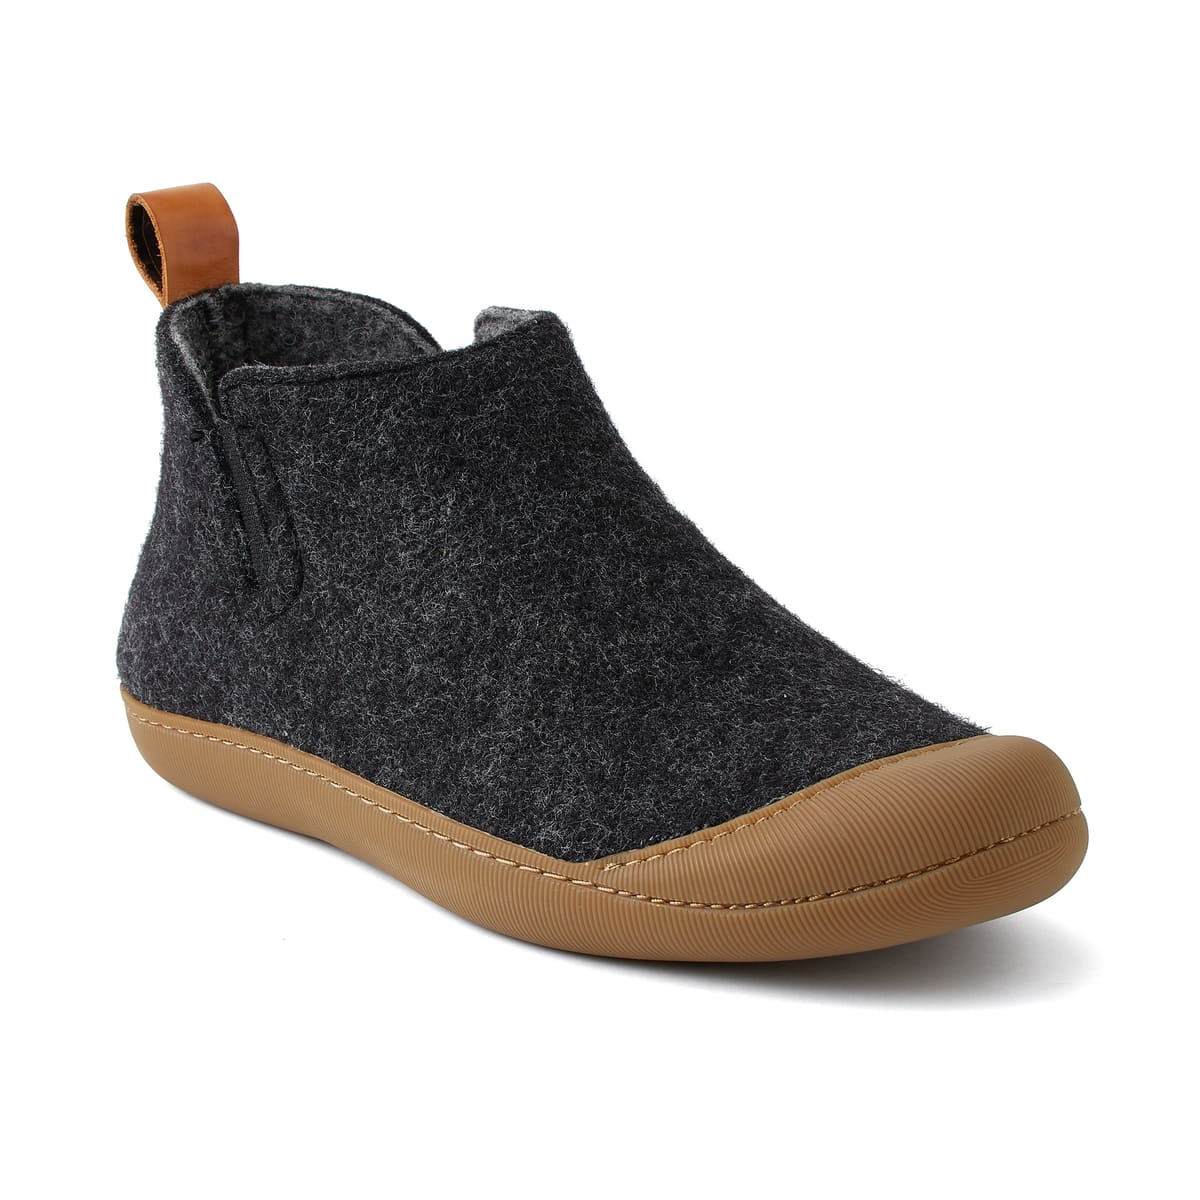 Greys: The Outdoor Slipper Boot